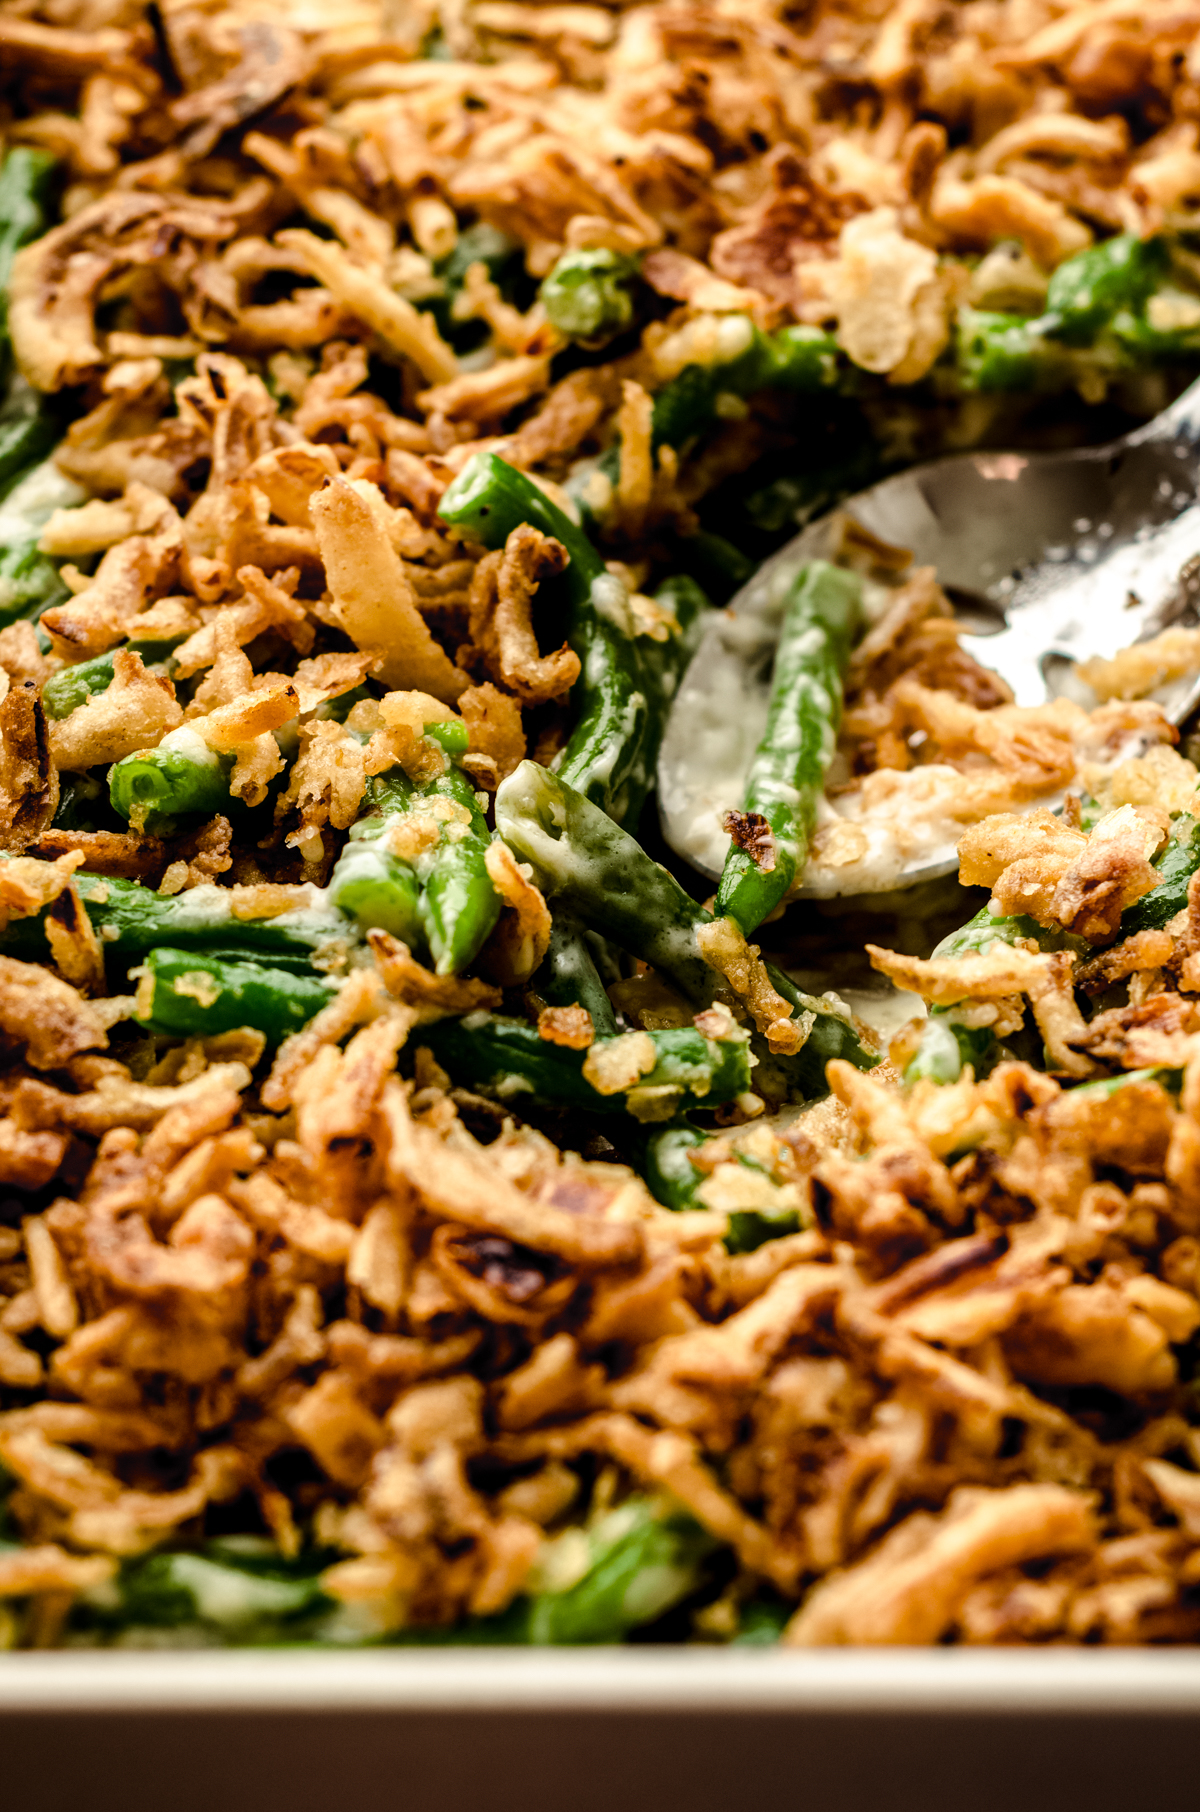 Green bean casserole without mushrooms in a baking dish with a serving spoon.